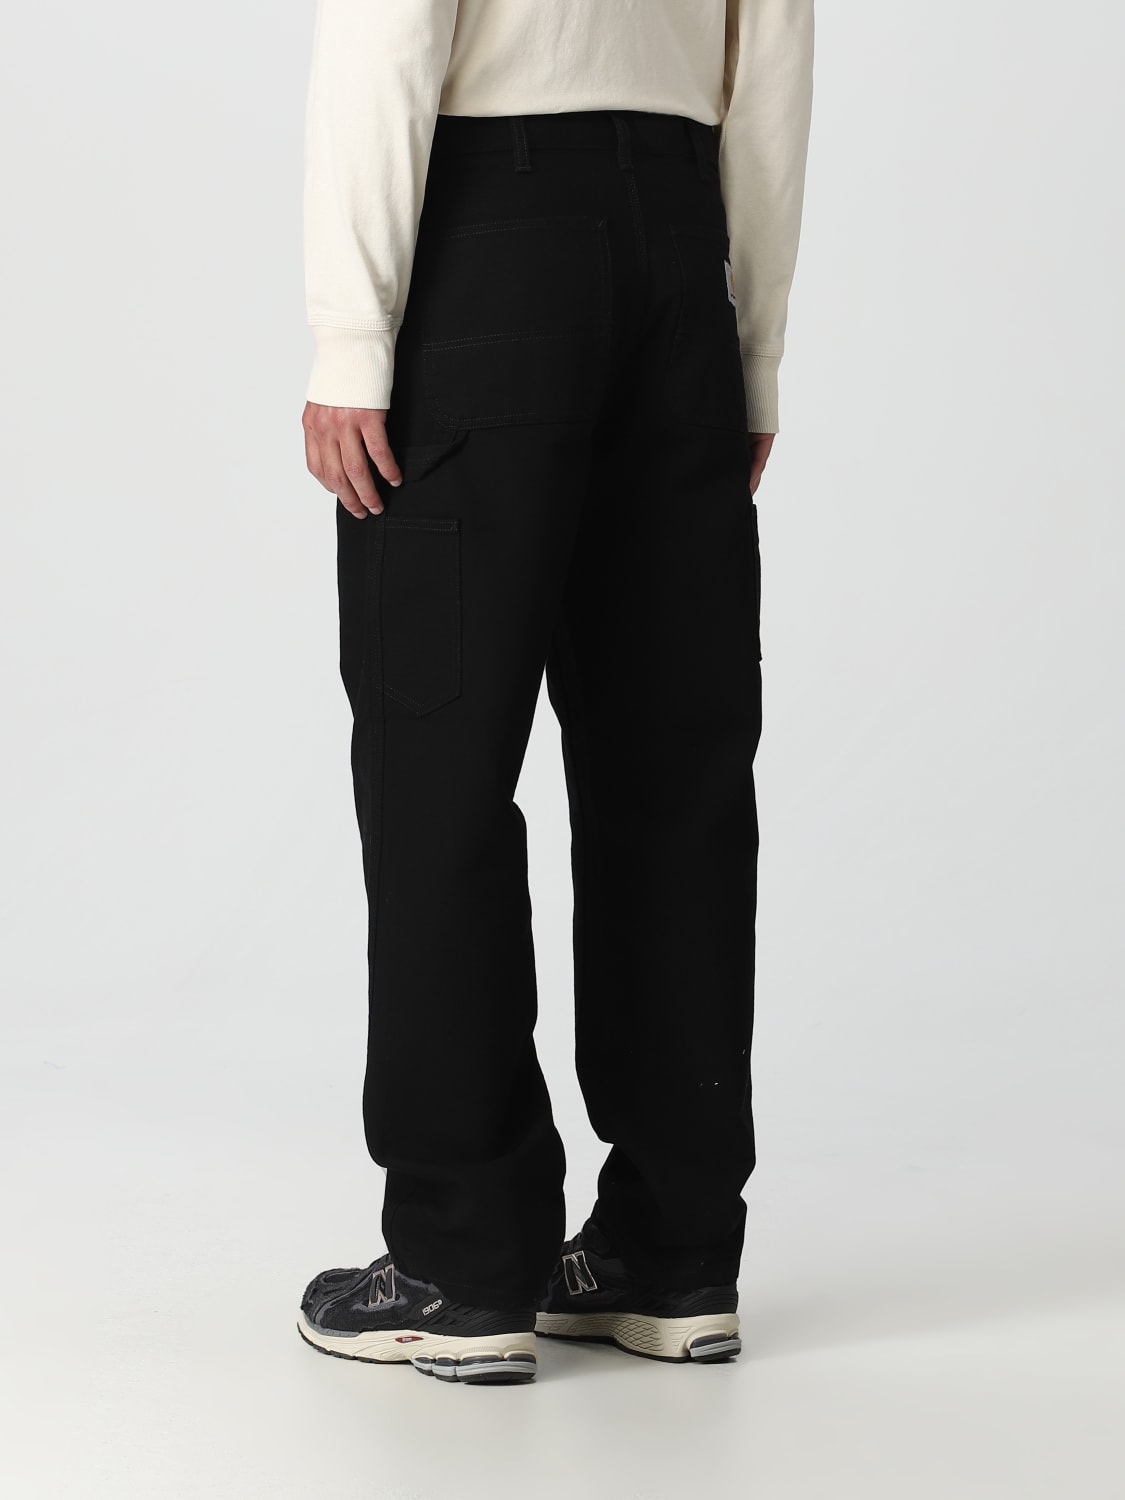 Carhartt WIP Jet Cargo Pant  Leather – Page Jet Cargo Pant